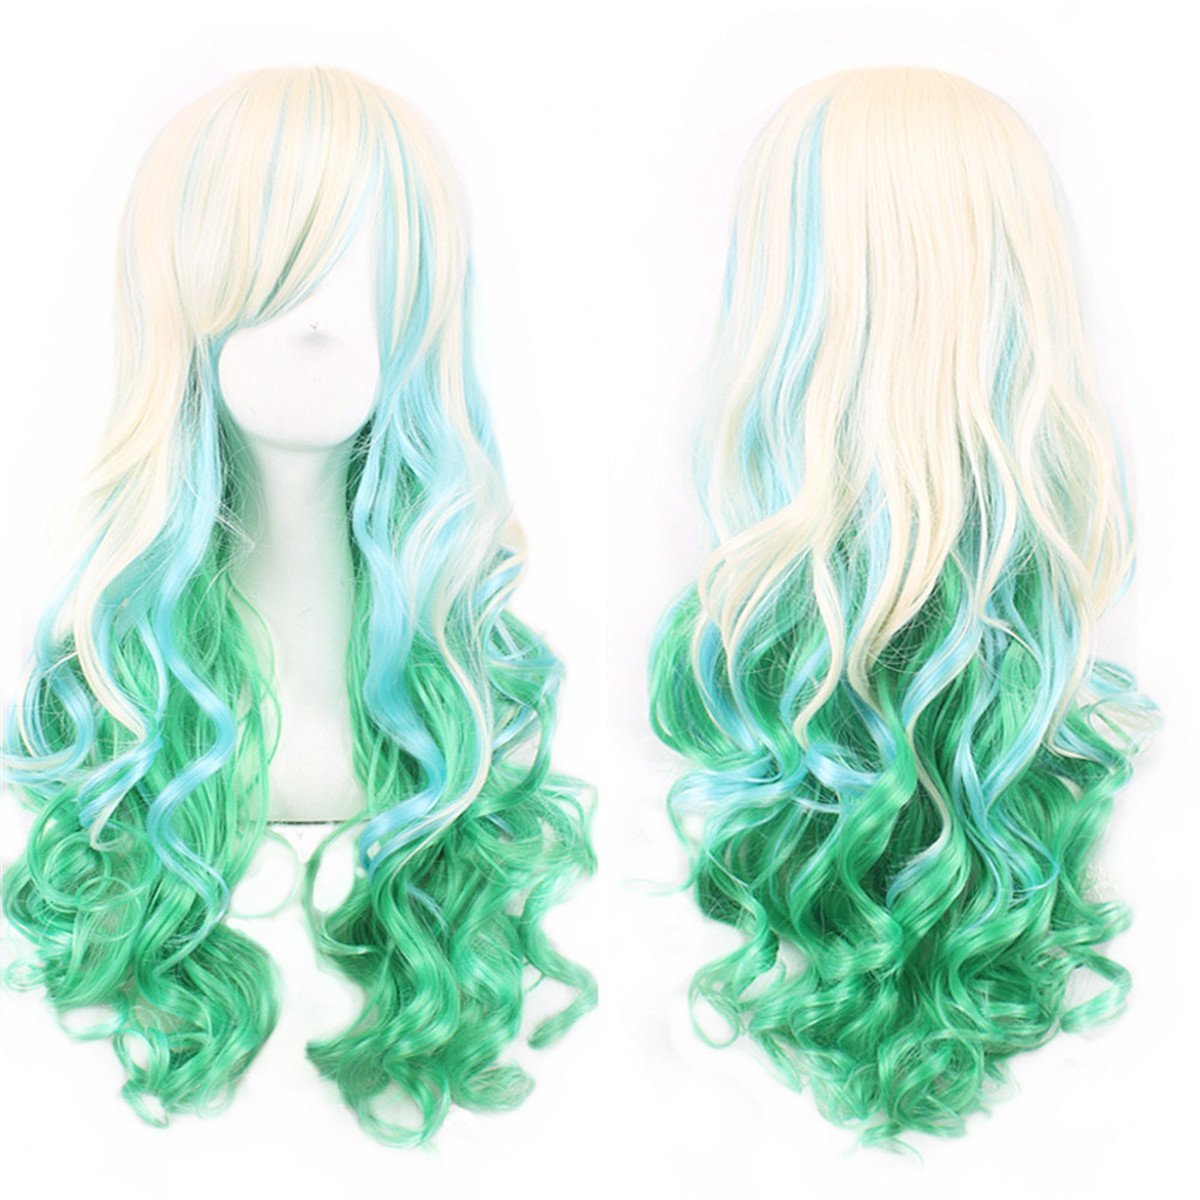 Price:$14.88    Long Curly Hair Wigs for Women Beige/Light Green Wig with Bangs BU036C  Beauty